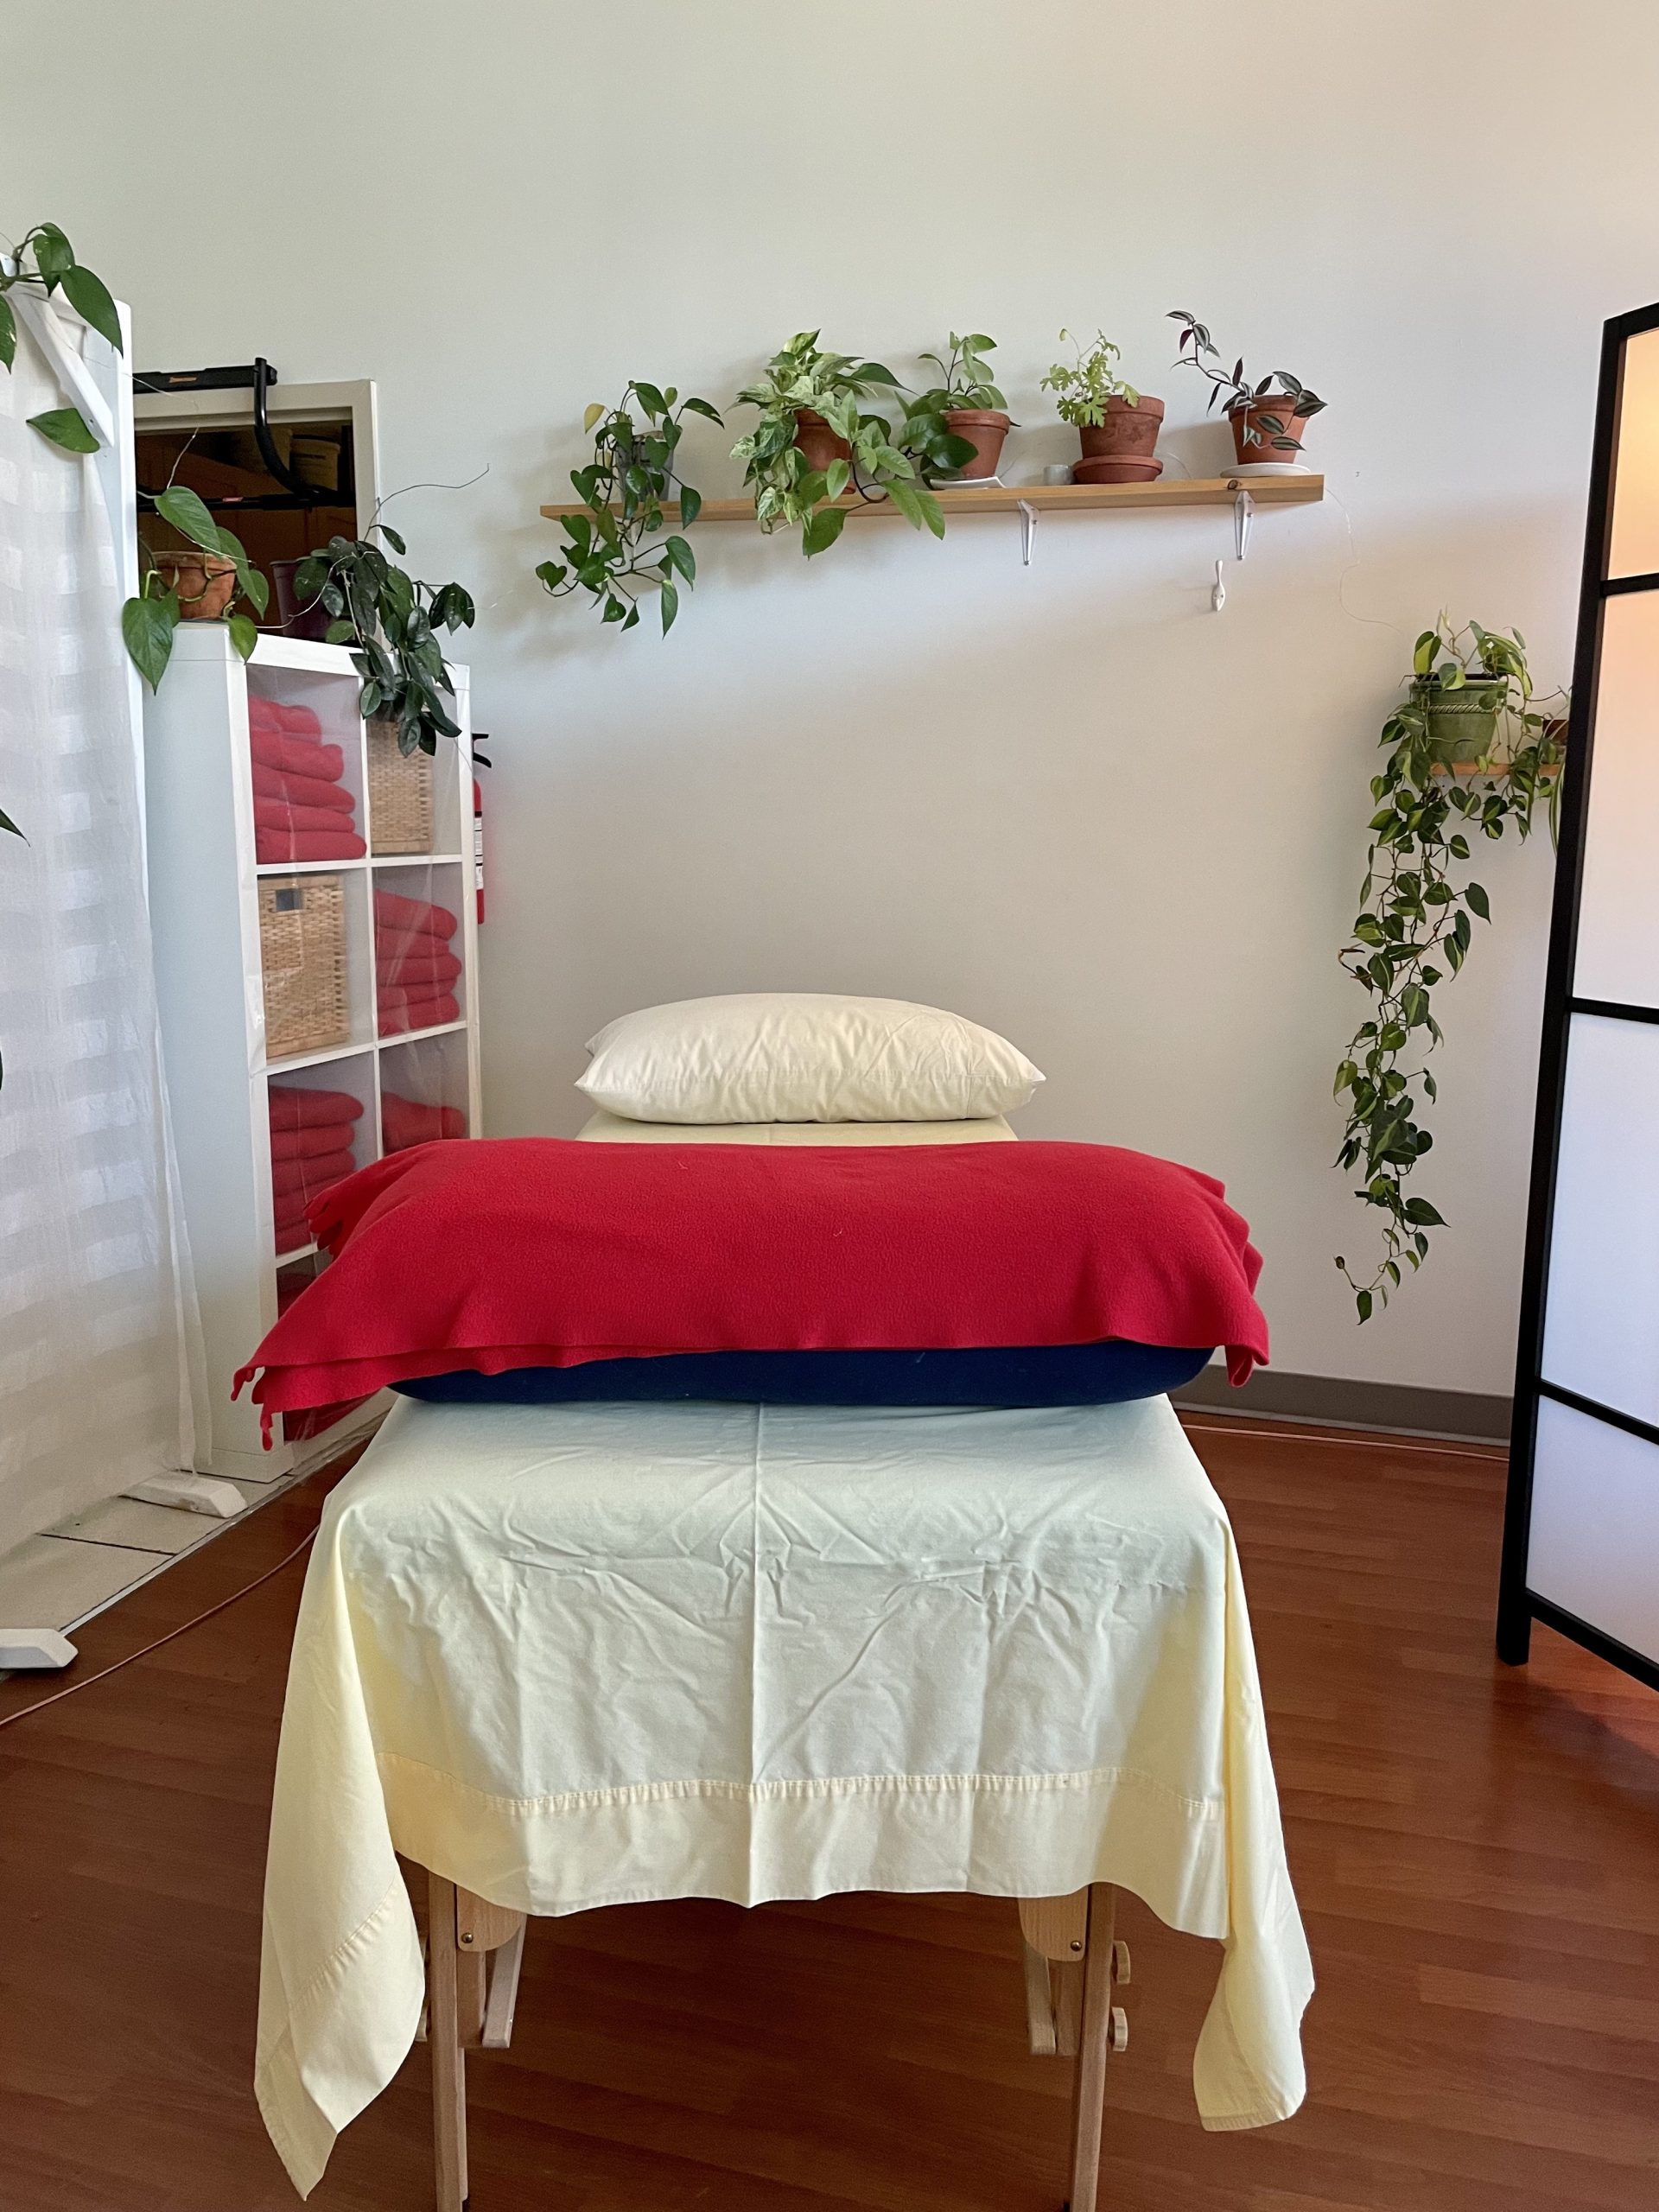 Massage table draped in a yellow sheet with a white pillow on the far end and a red bolster on the near end. View is straight-on. Potted plants on shelves are visible on the far wall.